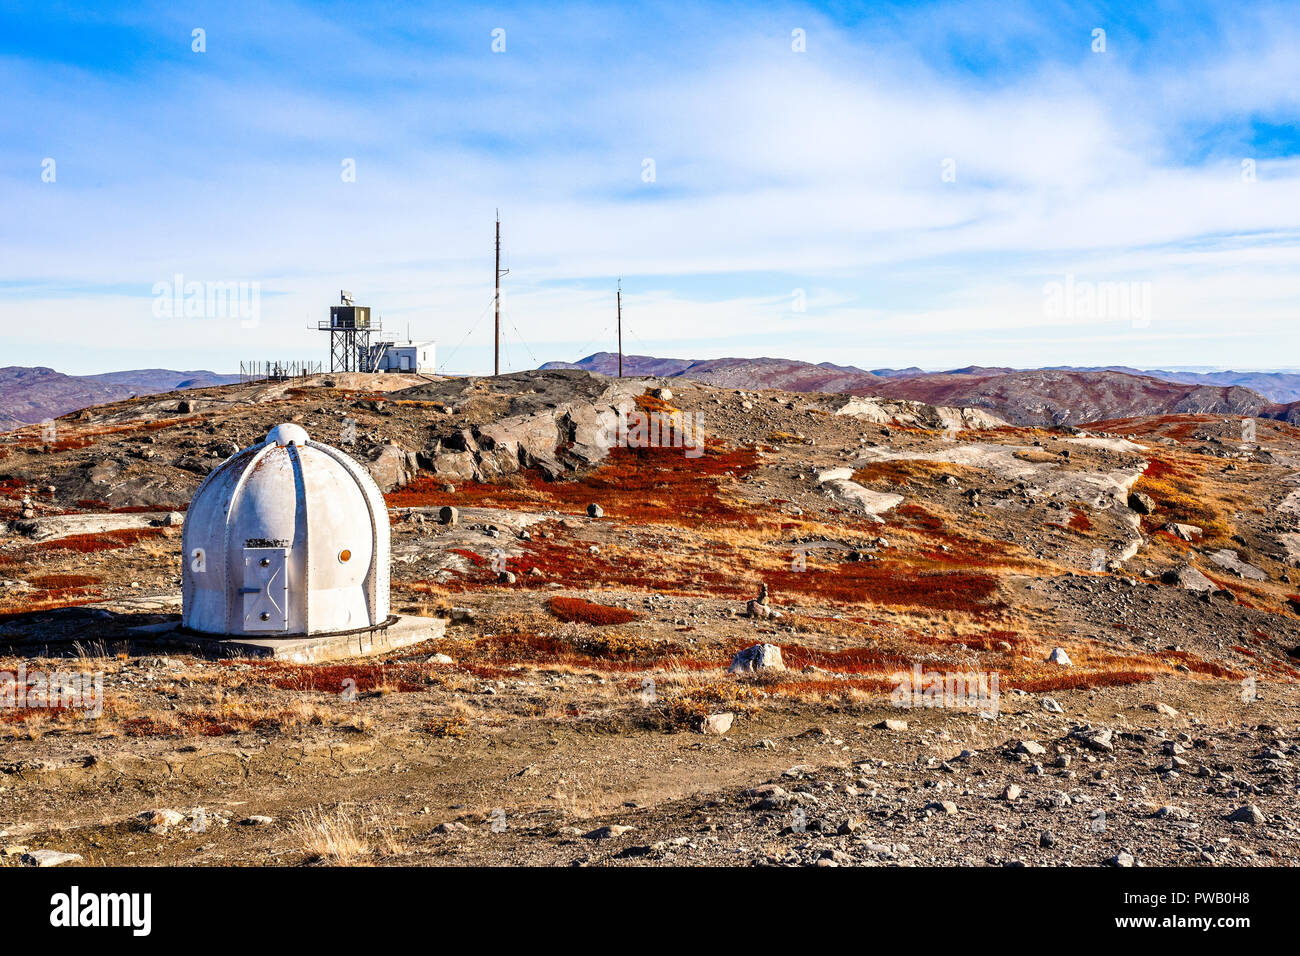 Metal bunker with meteorologic station and autumn greenlandic orange tundra landscape with mountains in the background, Kangerlussuaq, Greenland Stock Photo